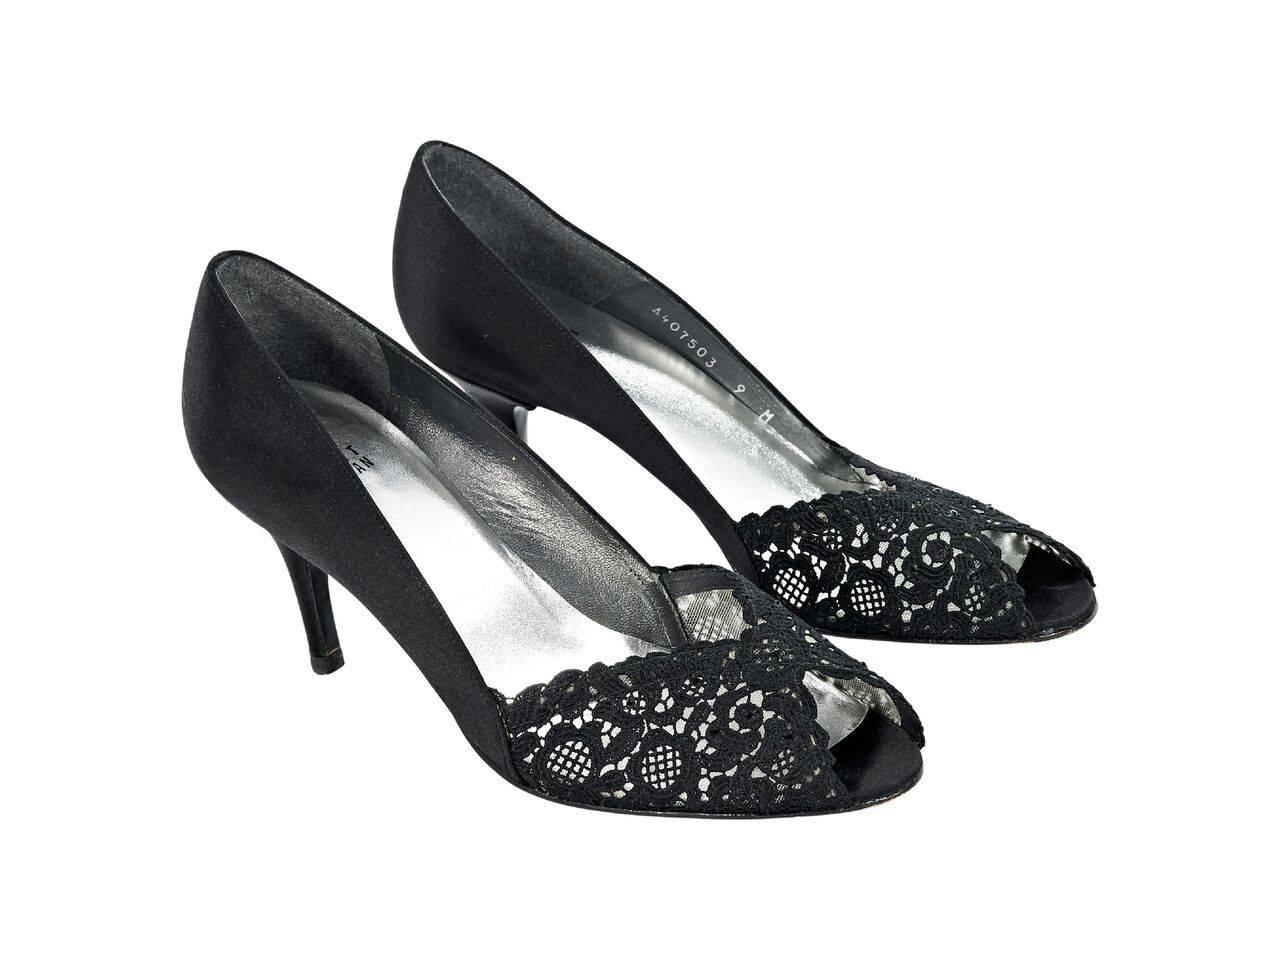 Product details:  Black satin and lace pumps by Stuart Weitzman.  Peep toe.  Slip-on style. 
Condition: Pre-owned. Very good.
Est. Retail $ 448.00